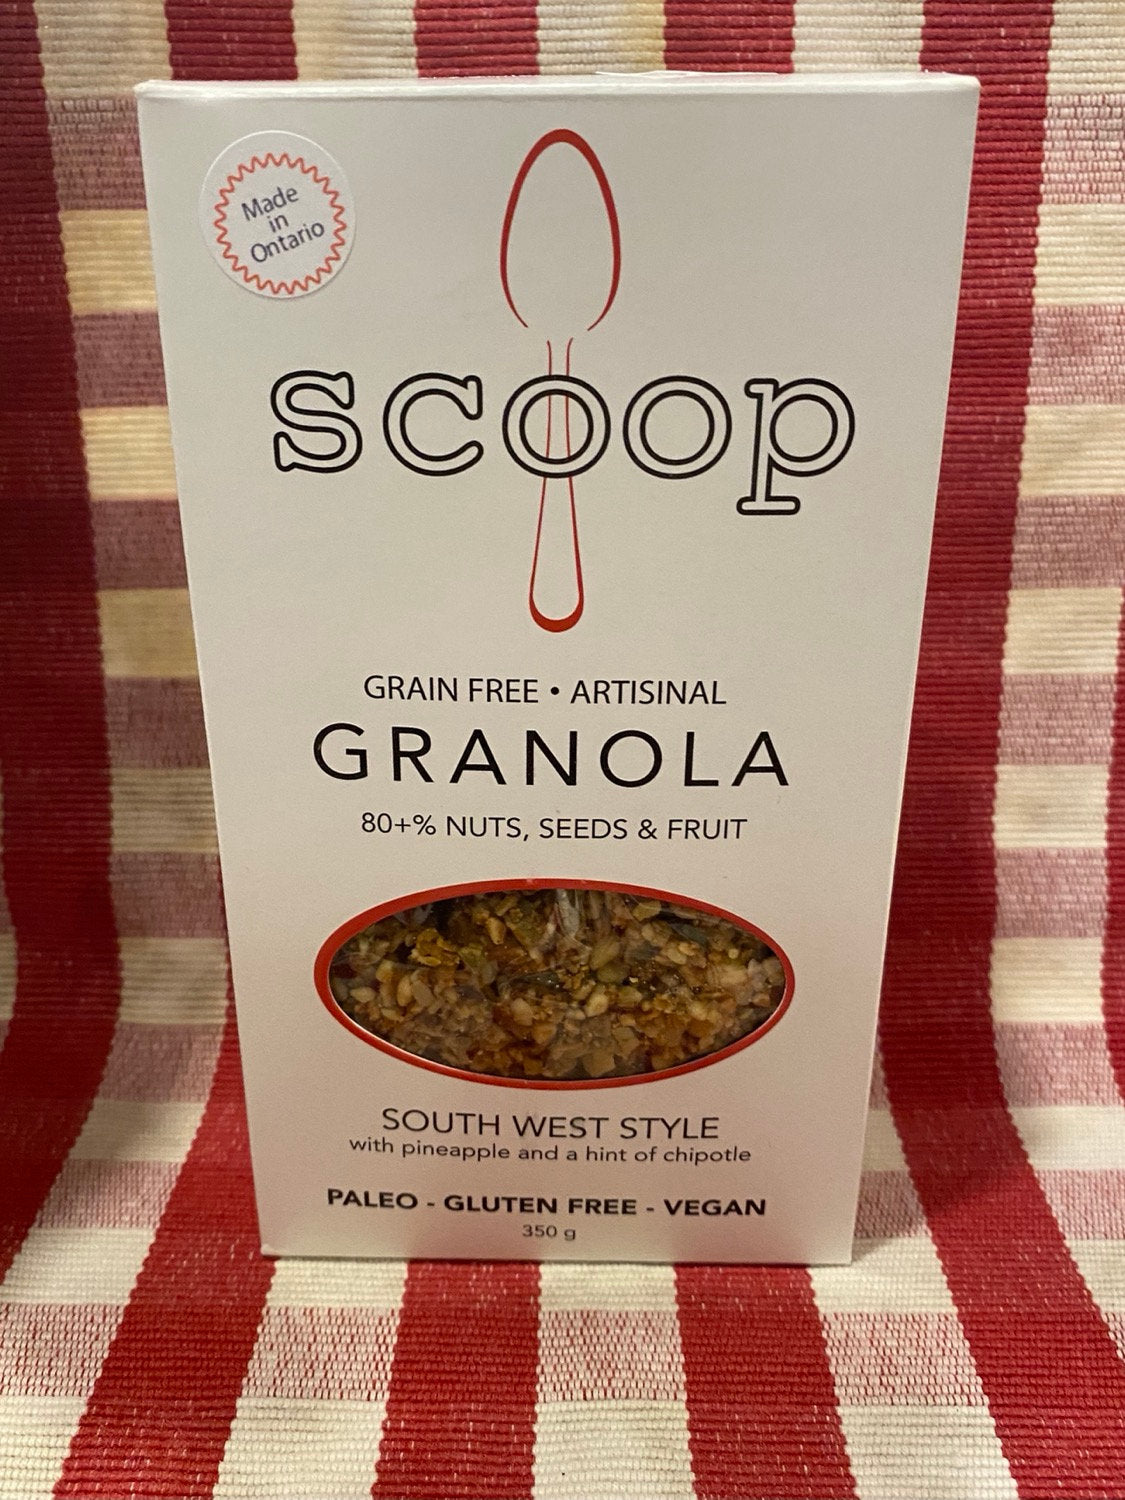 ✅ Scoop Granola - South West Style (350g)